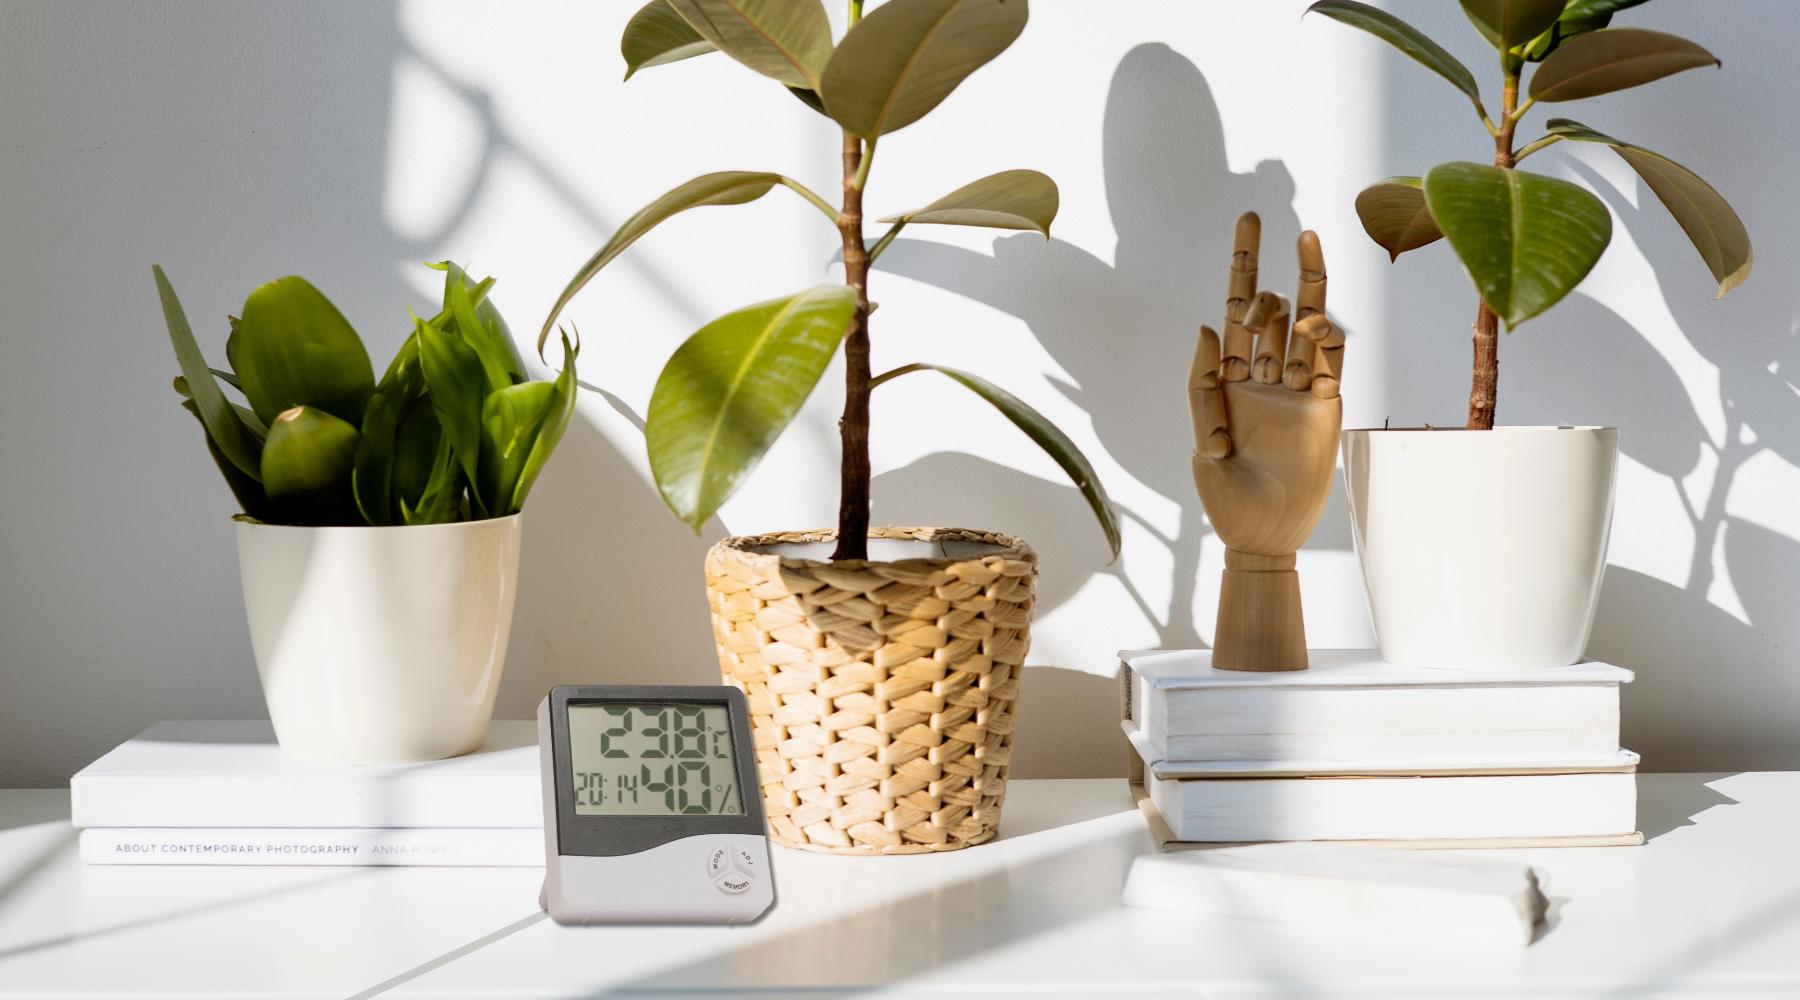 A Hygrometer on the table monitors the home humidity level